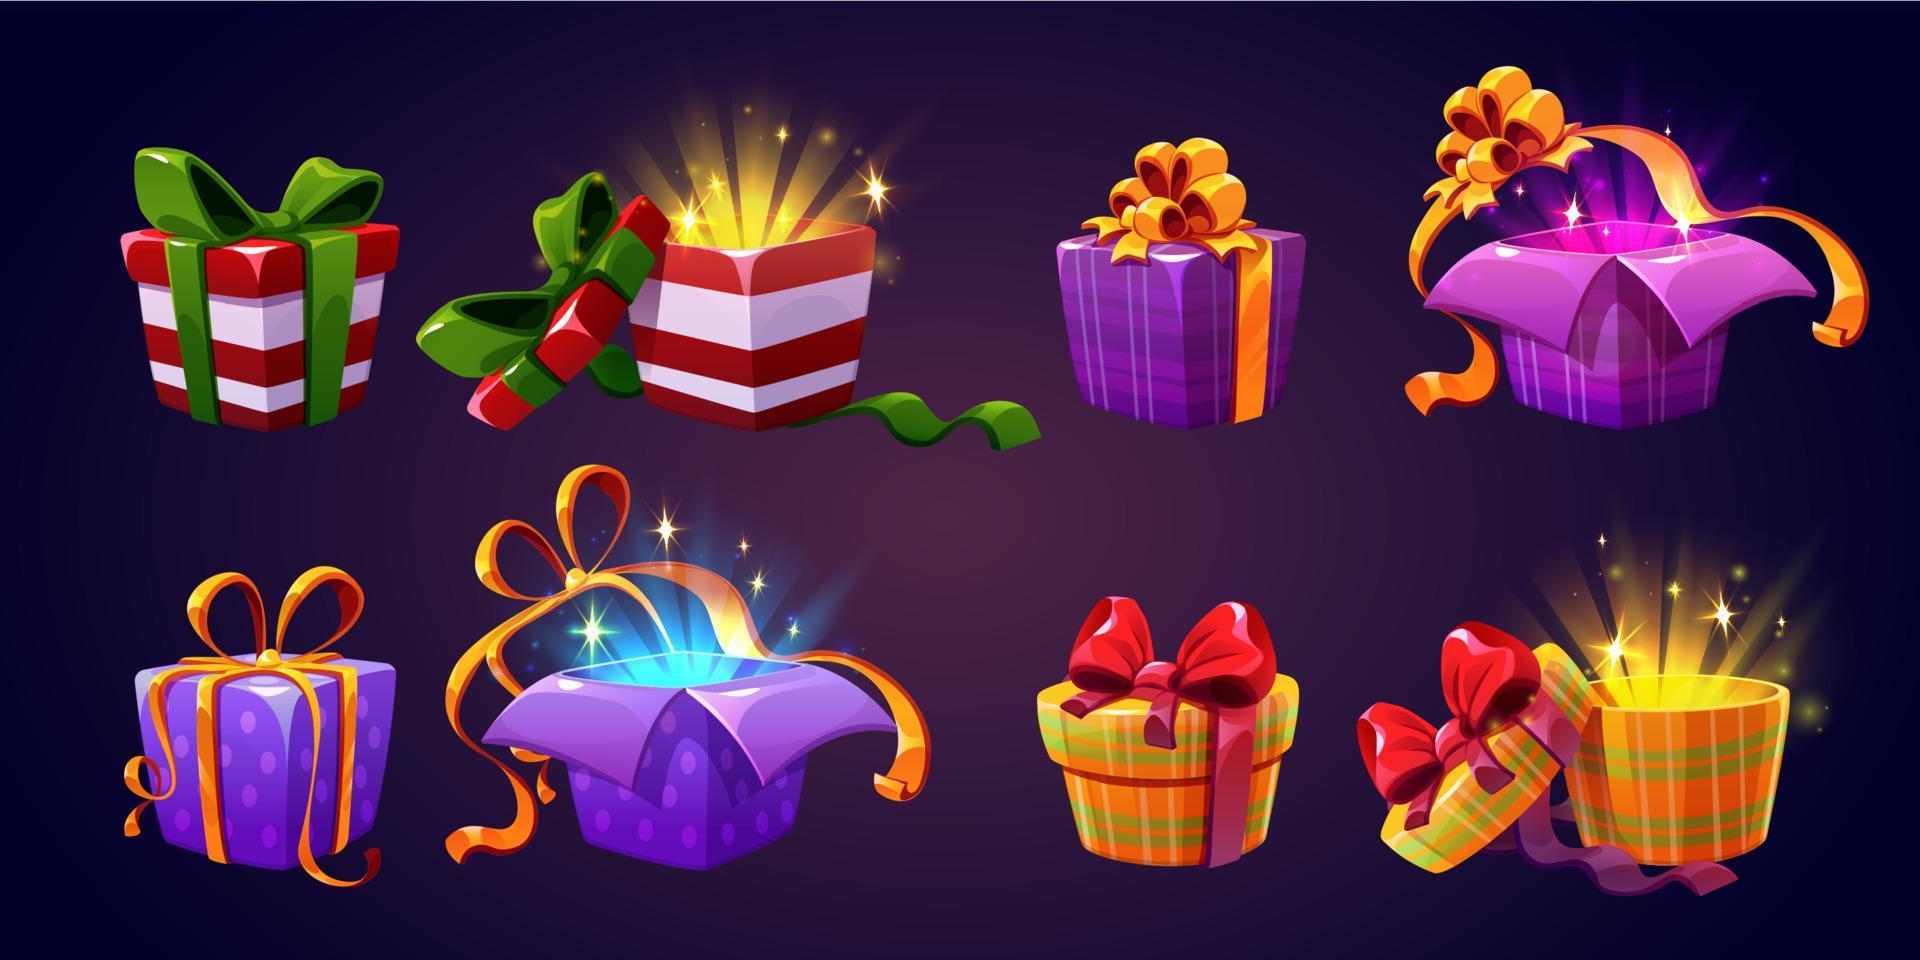 Set of open and closed gift boxes on background vector